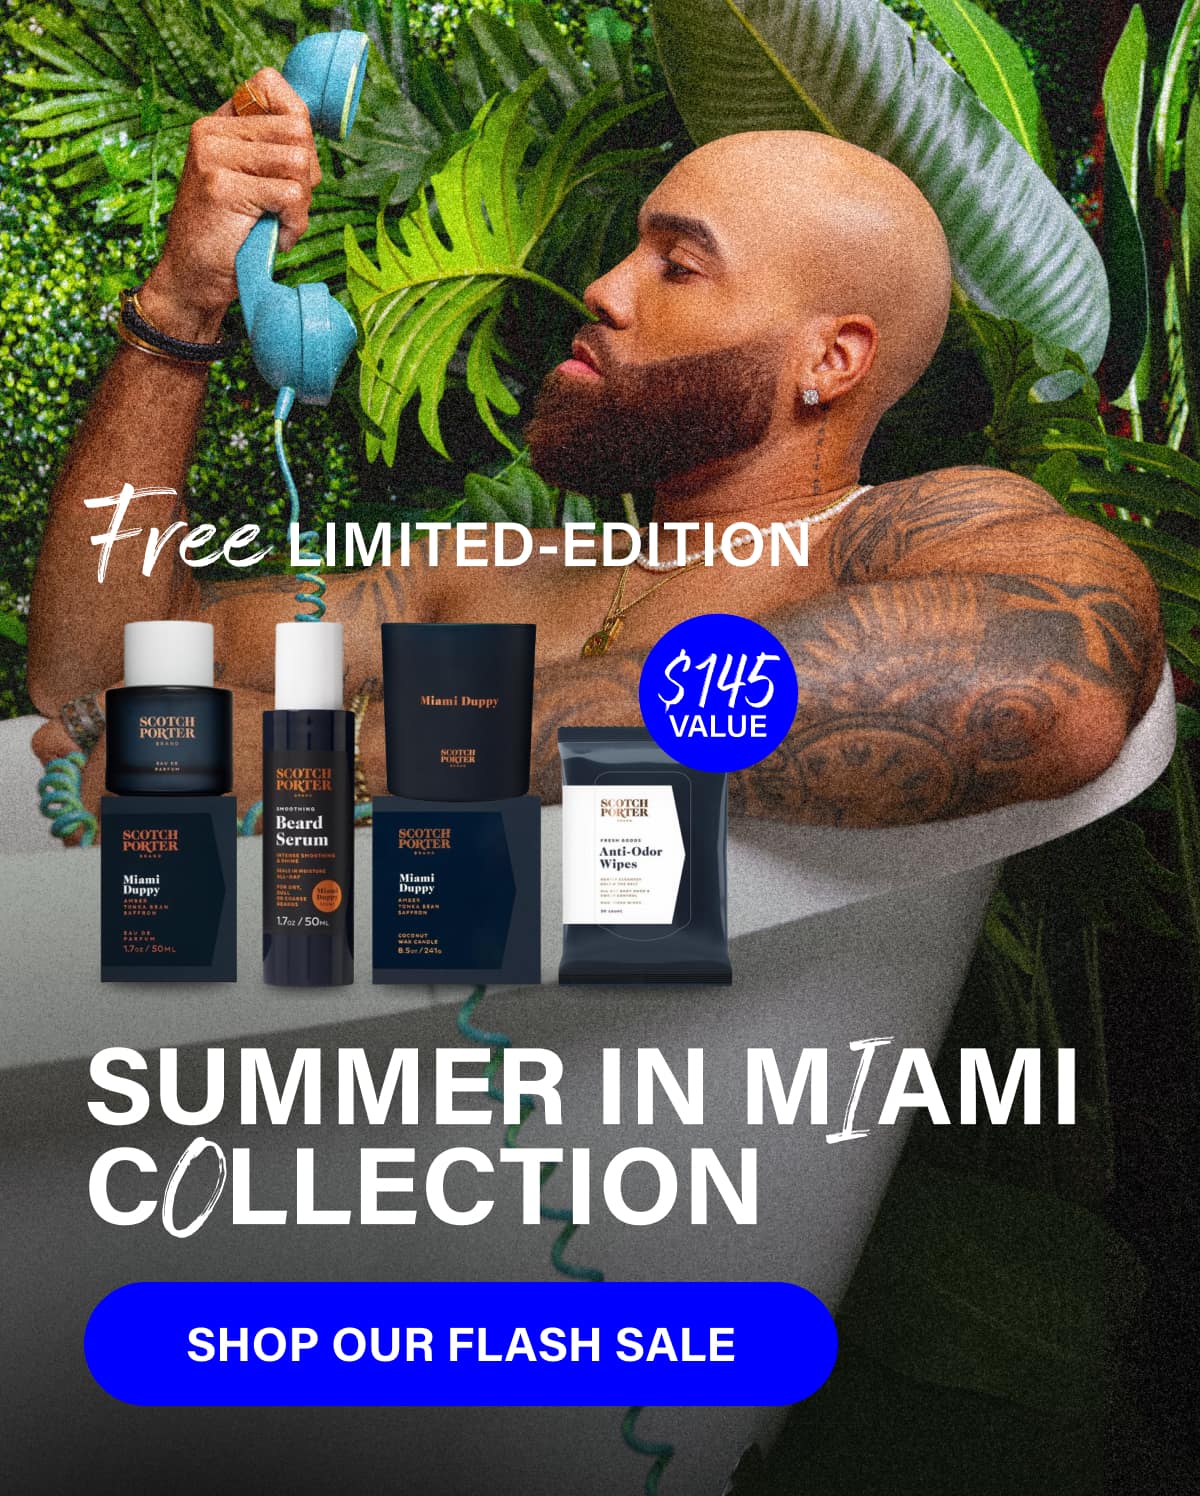 Free Limited-Edition Summer In Miami Collection